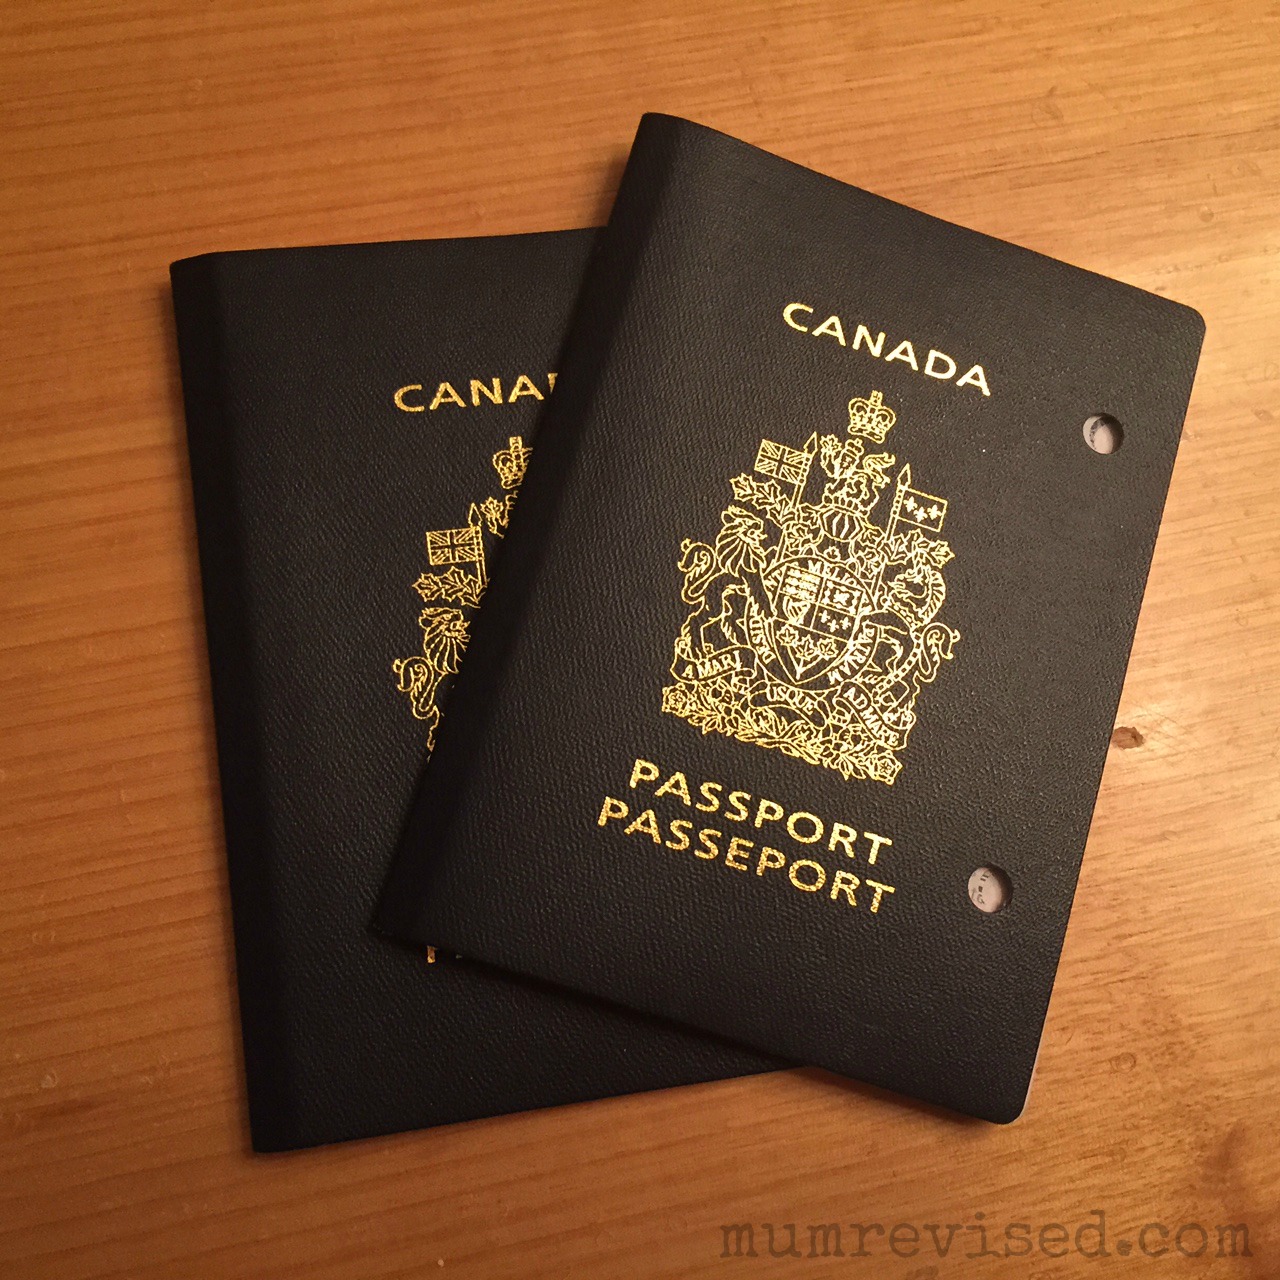 5 Things I Learned at the Passport Office